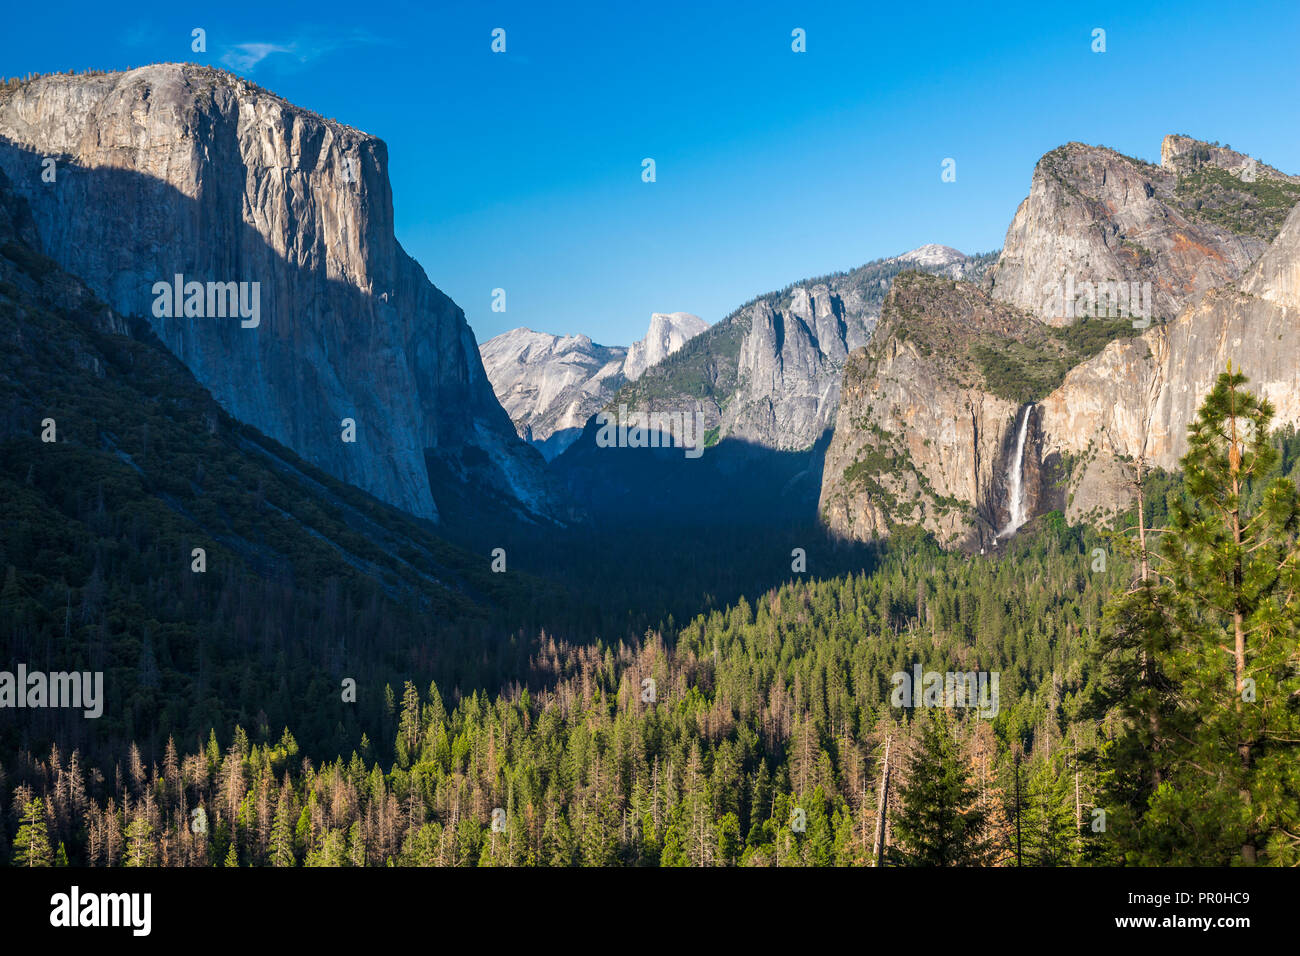 Yosemite Valley and Bridalveil Fall from Tunnel View, Yosemite National Park, UNESCO World Heritage Site, California, United States of America Stock Photo